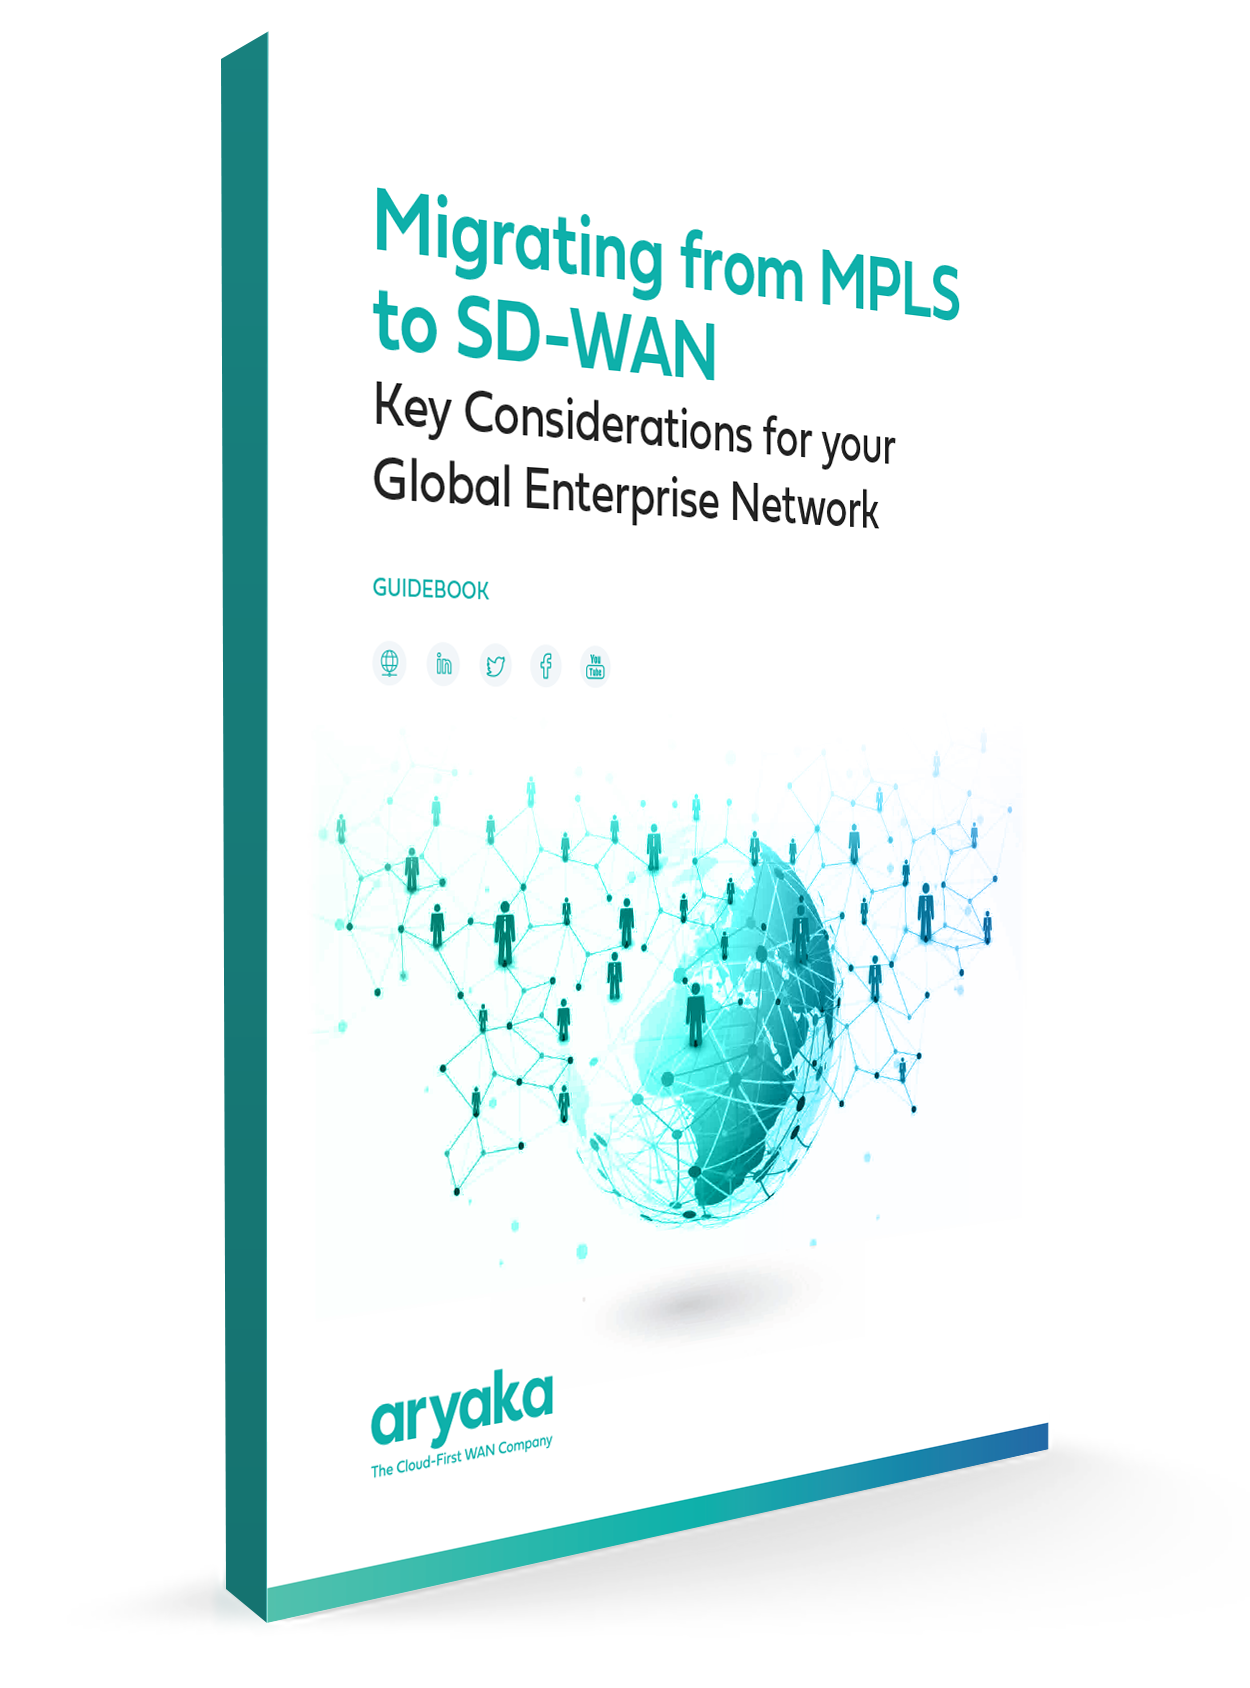 SMigrating from MPLS to SD-WAN: Key Considerations for Your Global Enterprise Network